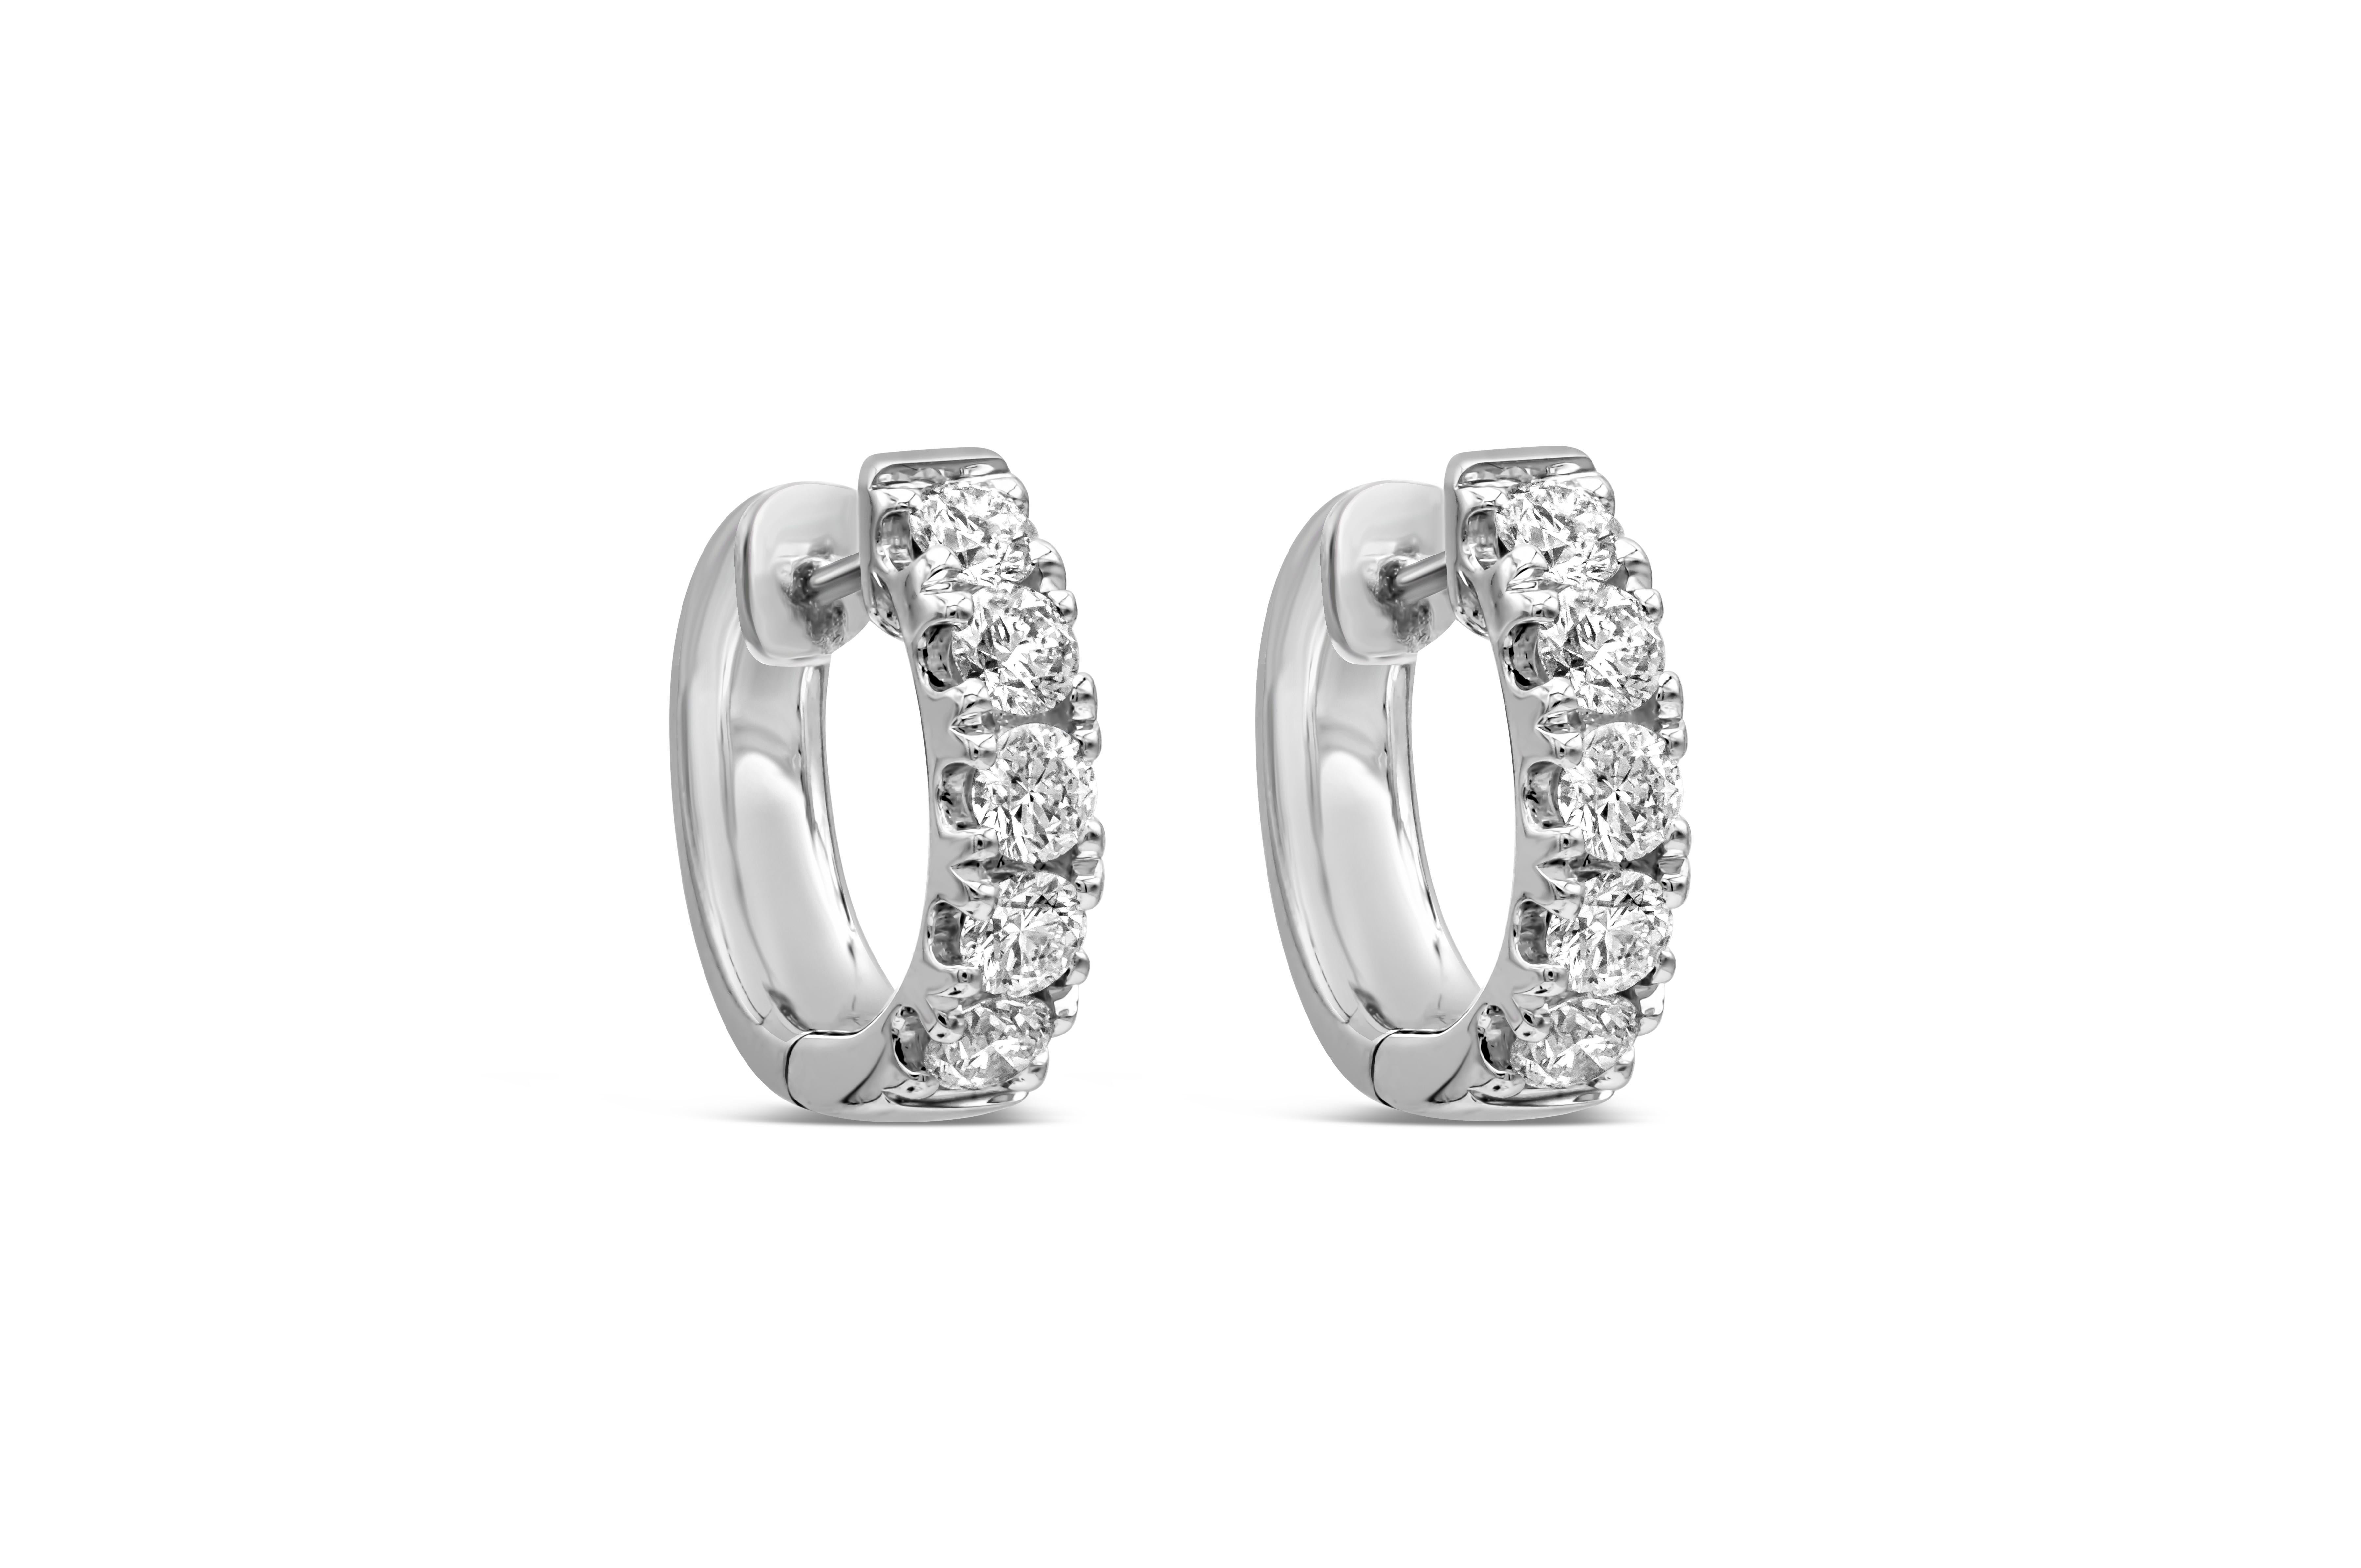 This pair of huggie earrings shows a total of 10 brilliant round diamonds. Diamonds weigh 1.00 carats total. Aprroximately F-G color, VS-SI clarity. Made in 18k white gold.

Roman Malakov is a custom house, specializing in creating anything you can